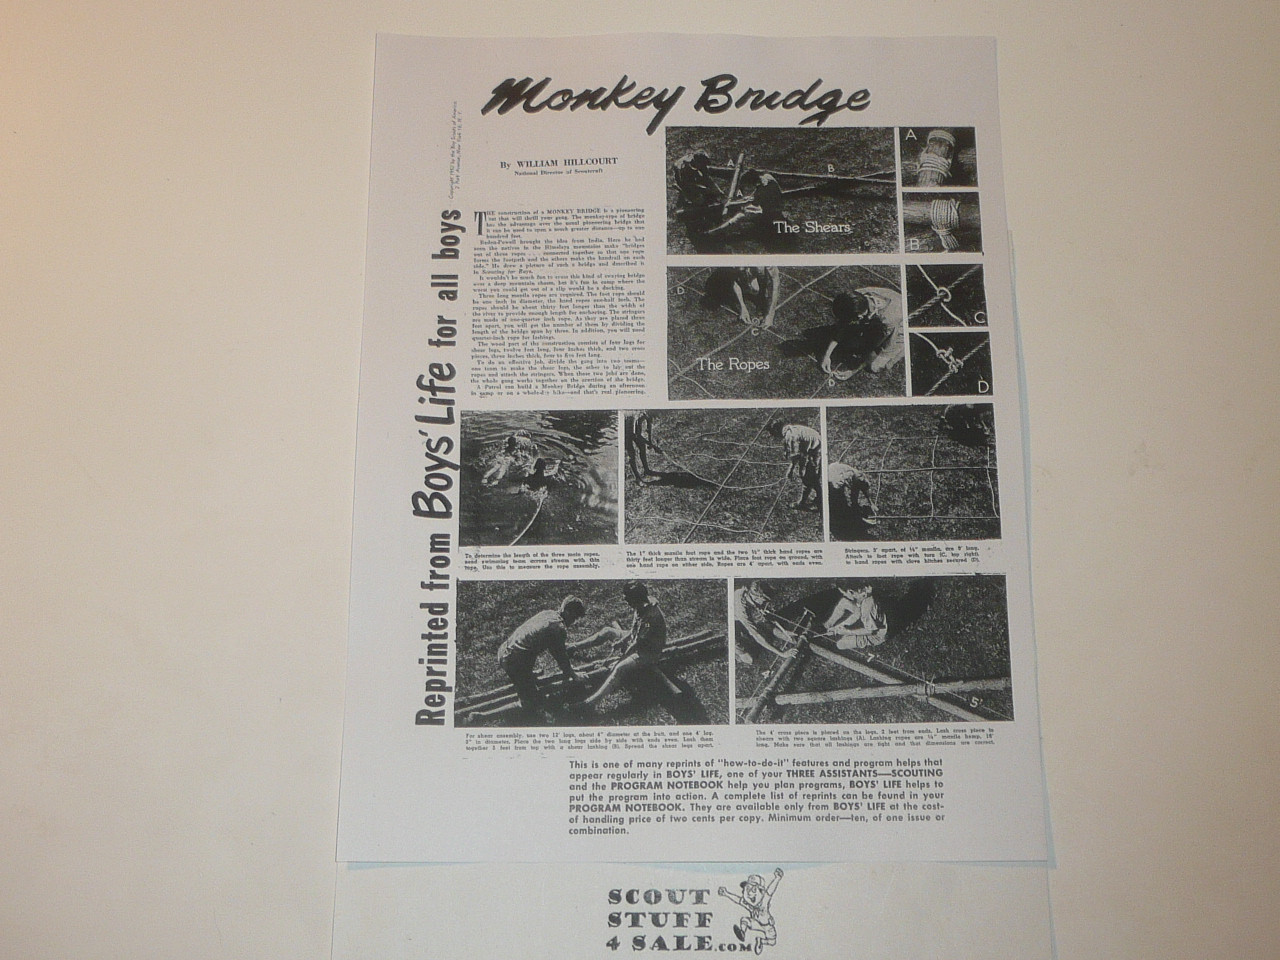 Monkey Bridge, By Green Bar Bill, Boys' Life Single Topic Reprint from the 1950's - 1960's , written for Scouts, great teaching materials